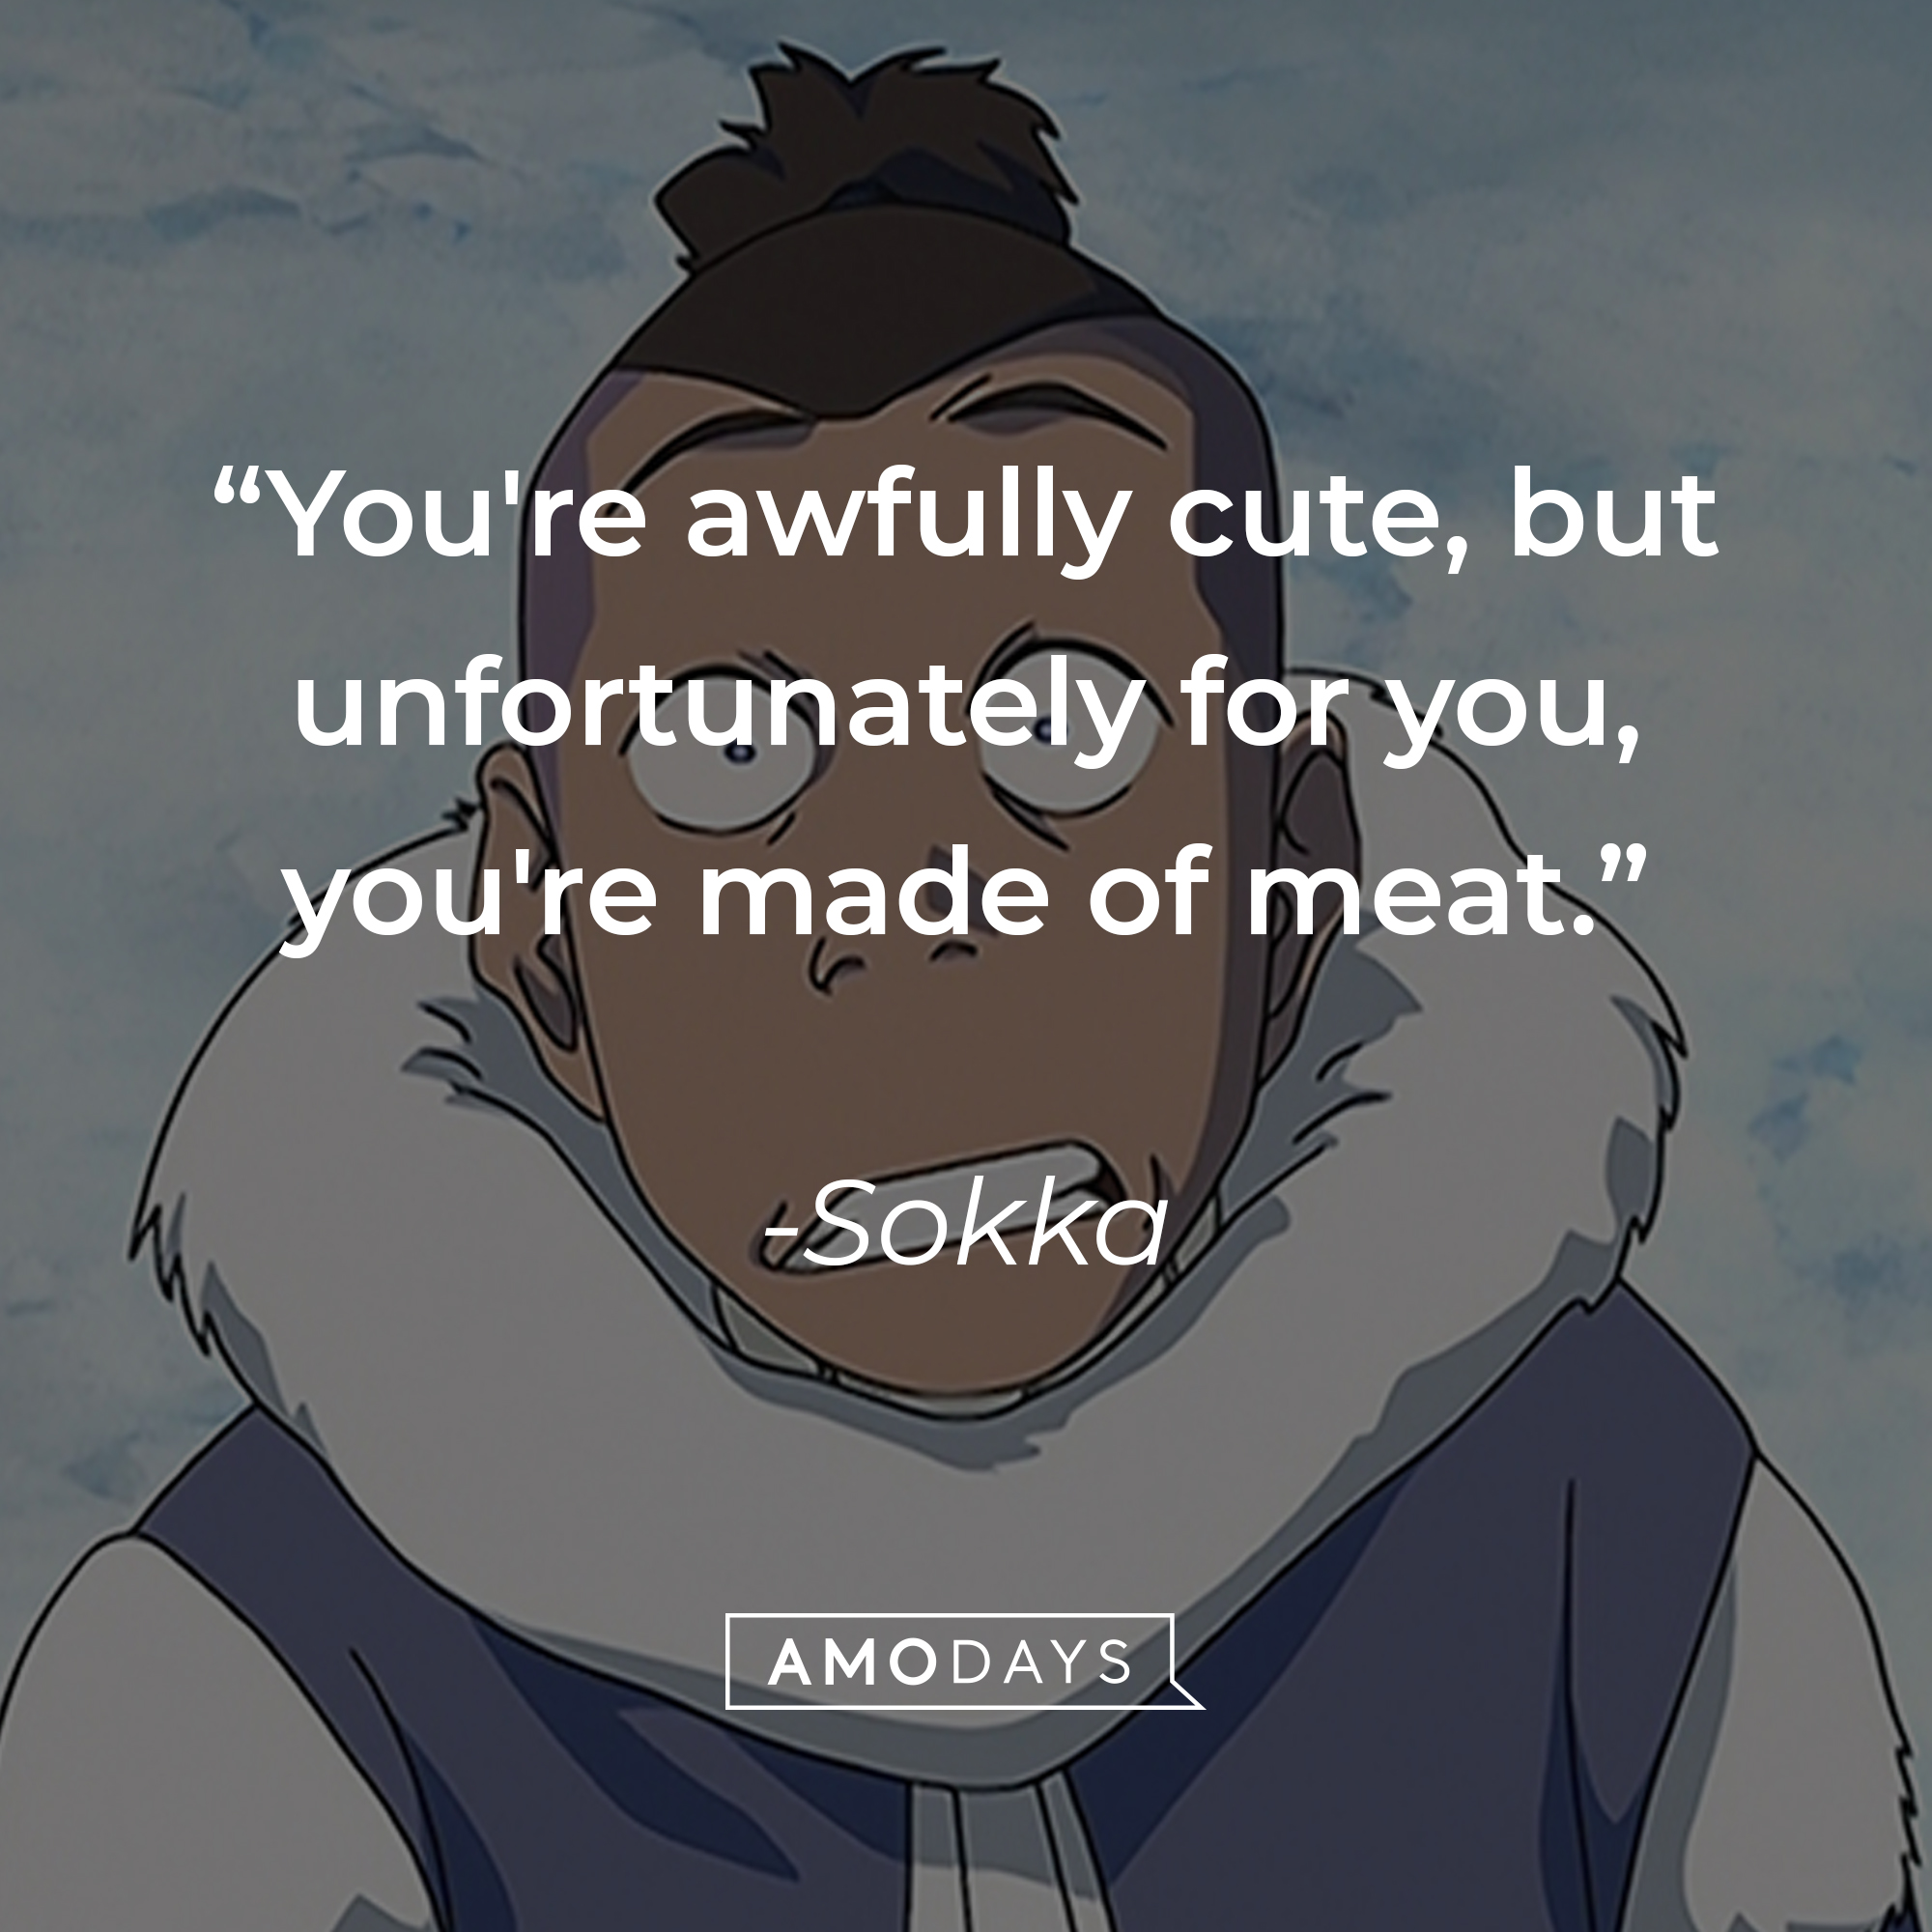 Sokka's quote: "You're awfully cute, but unfortunately for you, you're made of meat." | Source: facebook.com/avatarthelastairbender